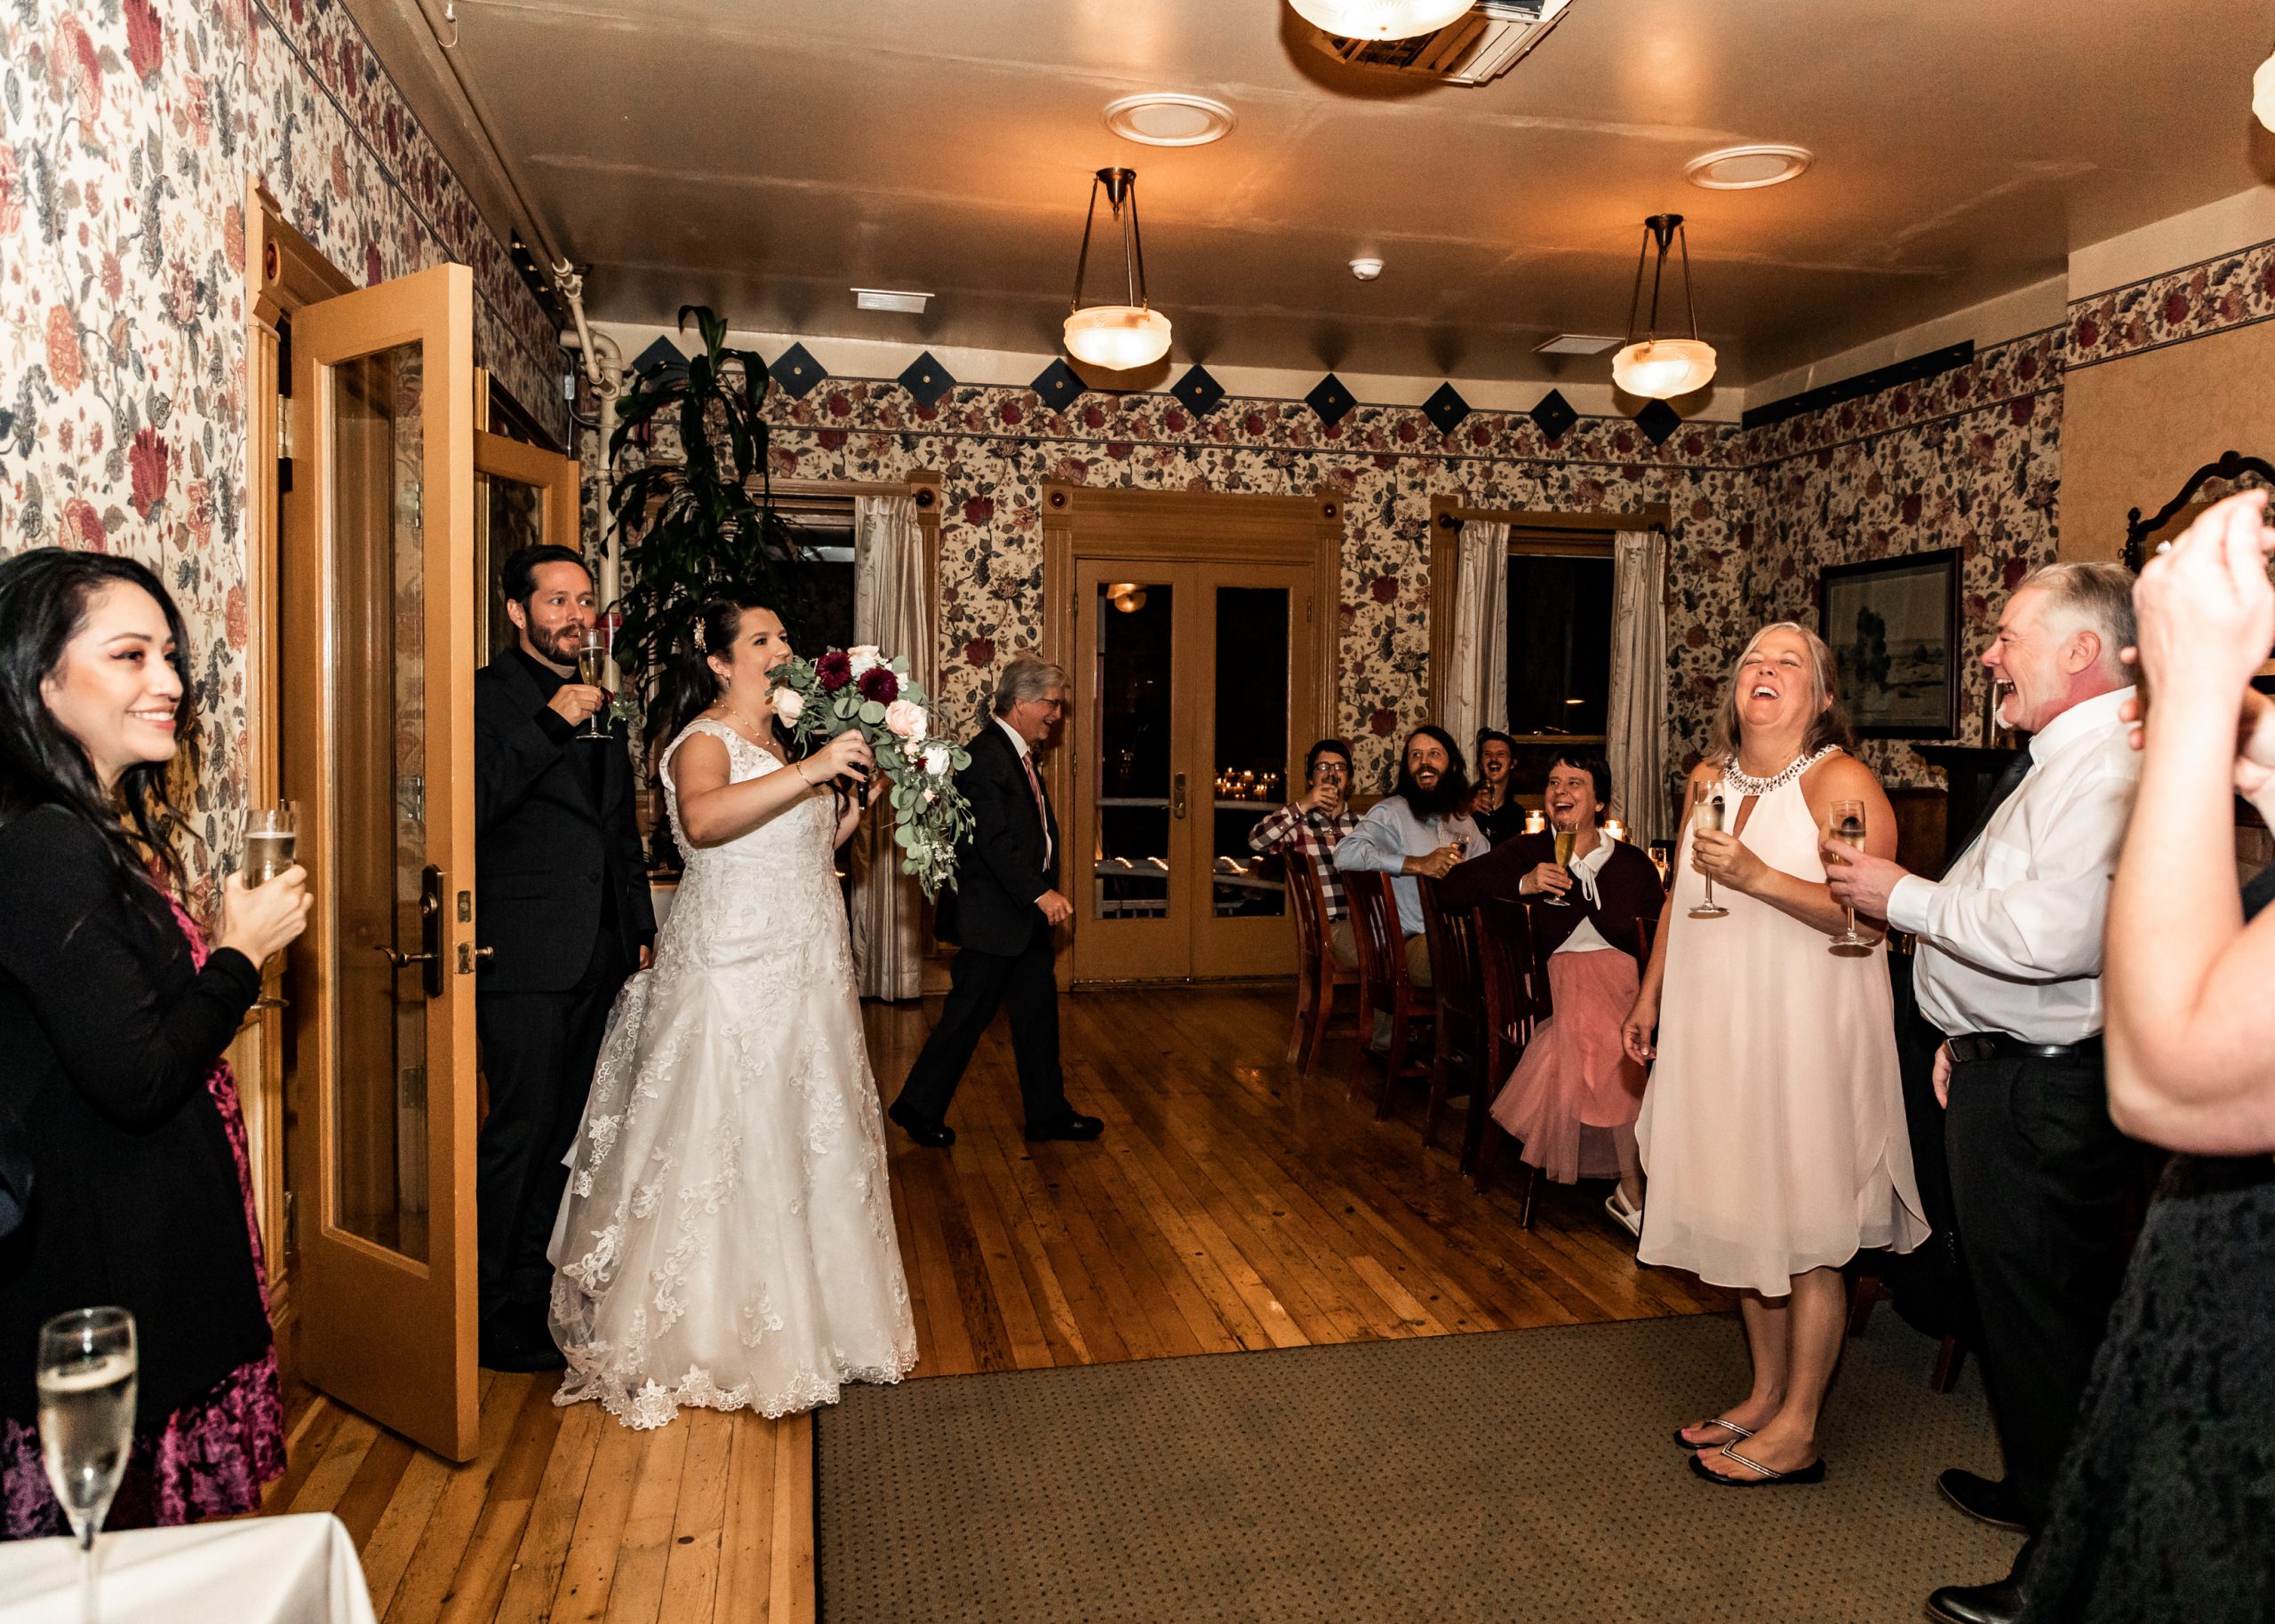 The Weatherford Hotel in Flagstaff Arizona, one of the most historic flagstaff wedding venues | Have beautiful weddings in Flagstaff | Wedding Venue in Flagstaff | Wedding Venue Flagstaff